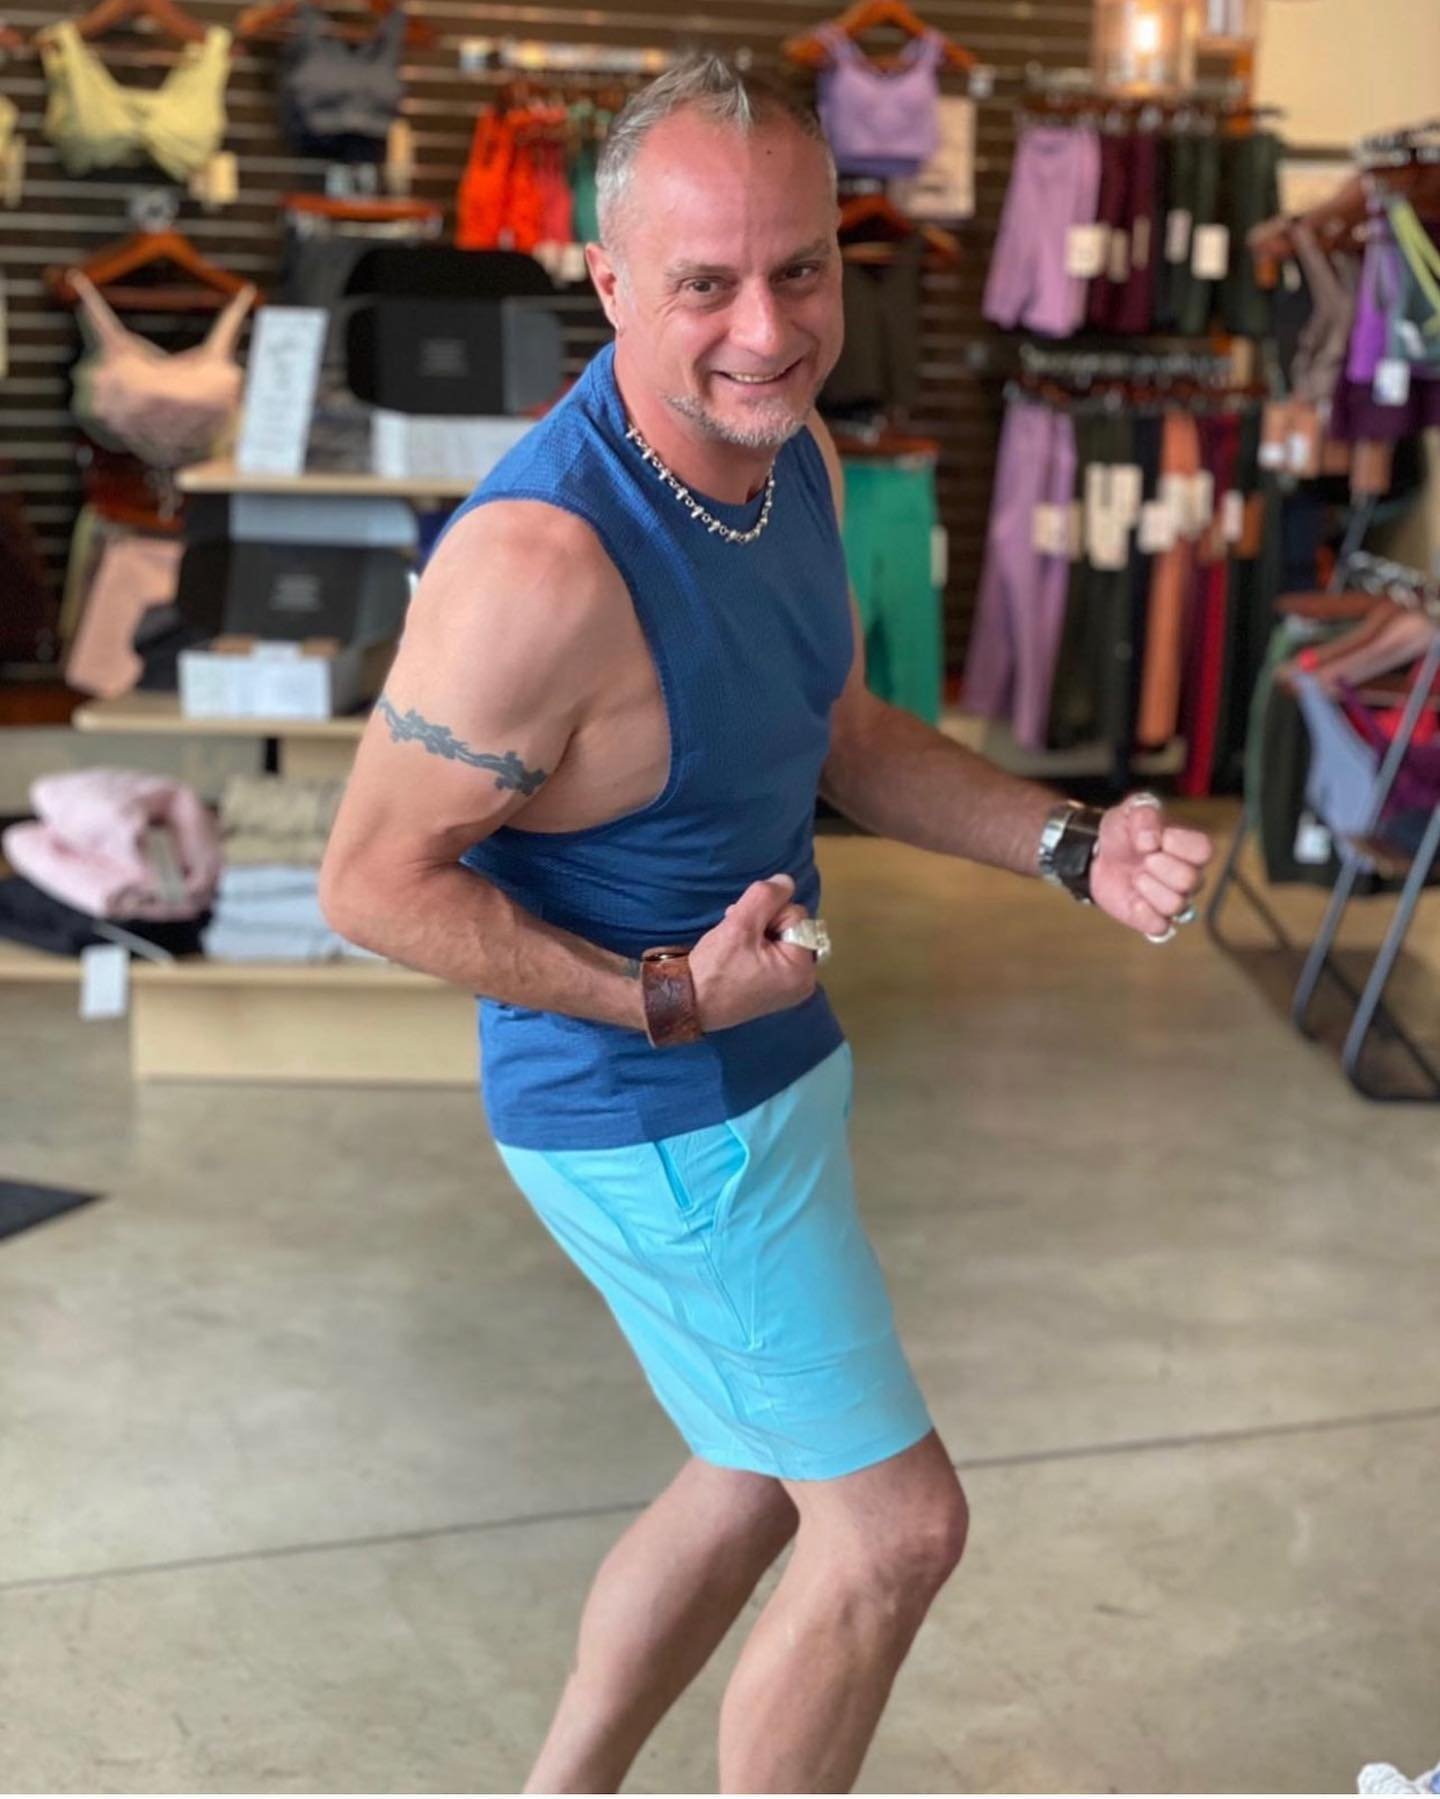 Did you know we carry athletic wear for men? 
.
Good quality clothes made for moving and sweating in make a biiig impact in your practice!
.
Come check &lsquo;em out 🥰
.
.
#athleisure #lululemon #yogastudio #pilatesstudio #namastenorth